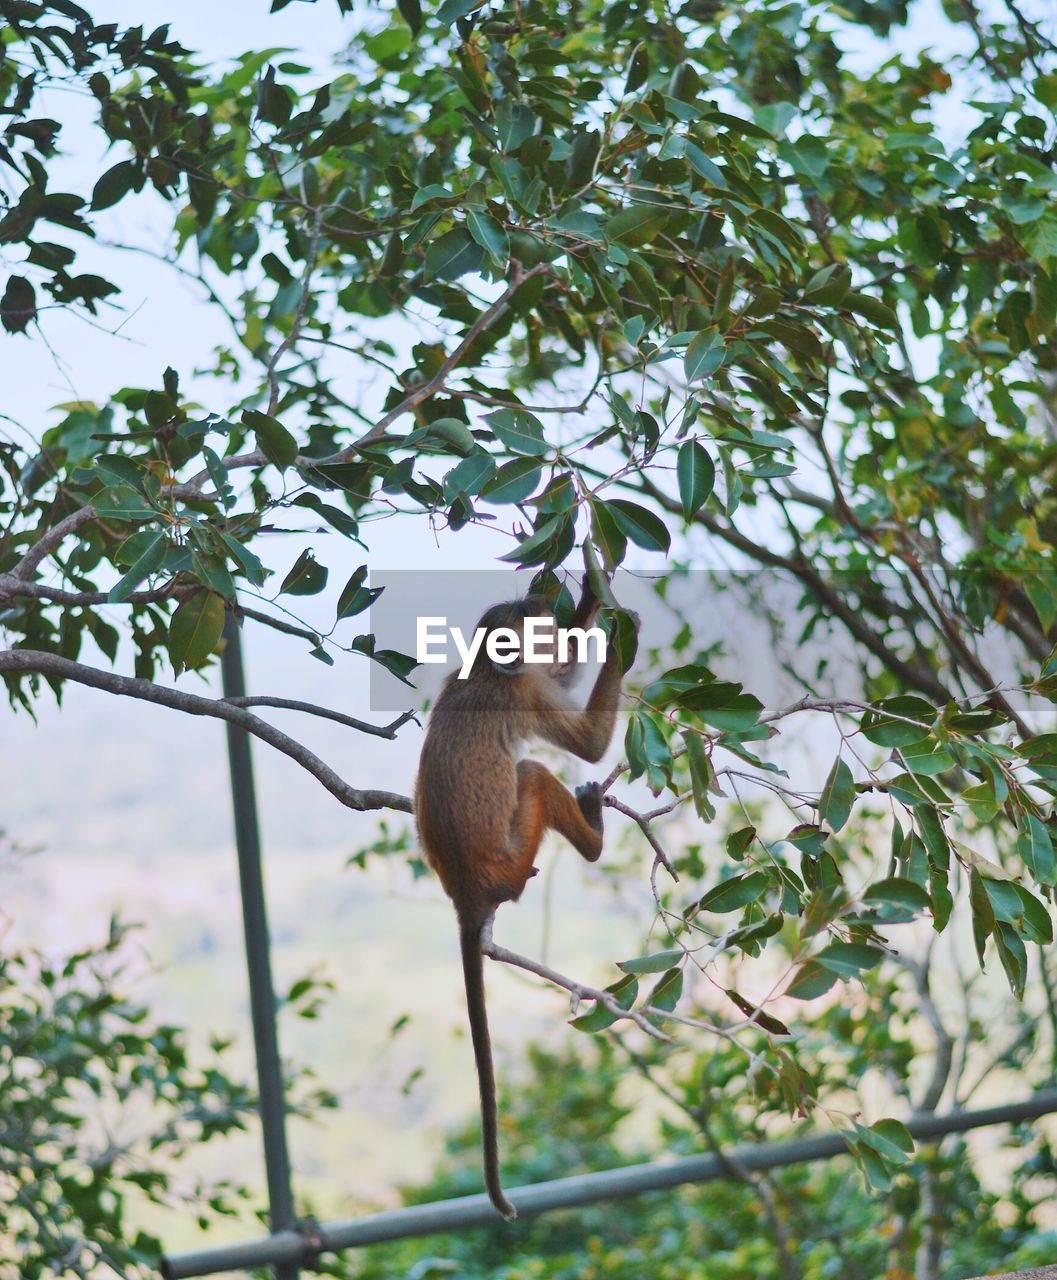 LOW ANGLE VIEW OF MONKEY ON TREE AGAINST TREES